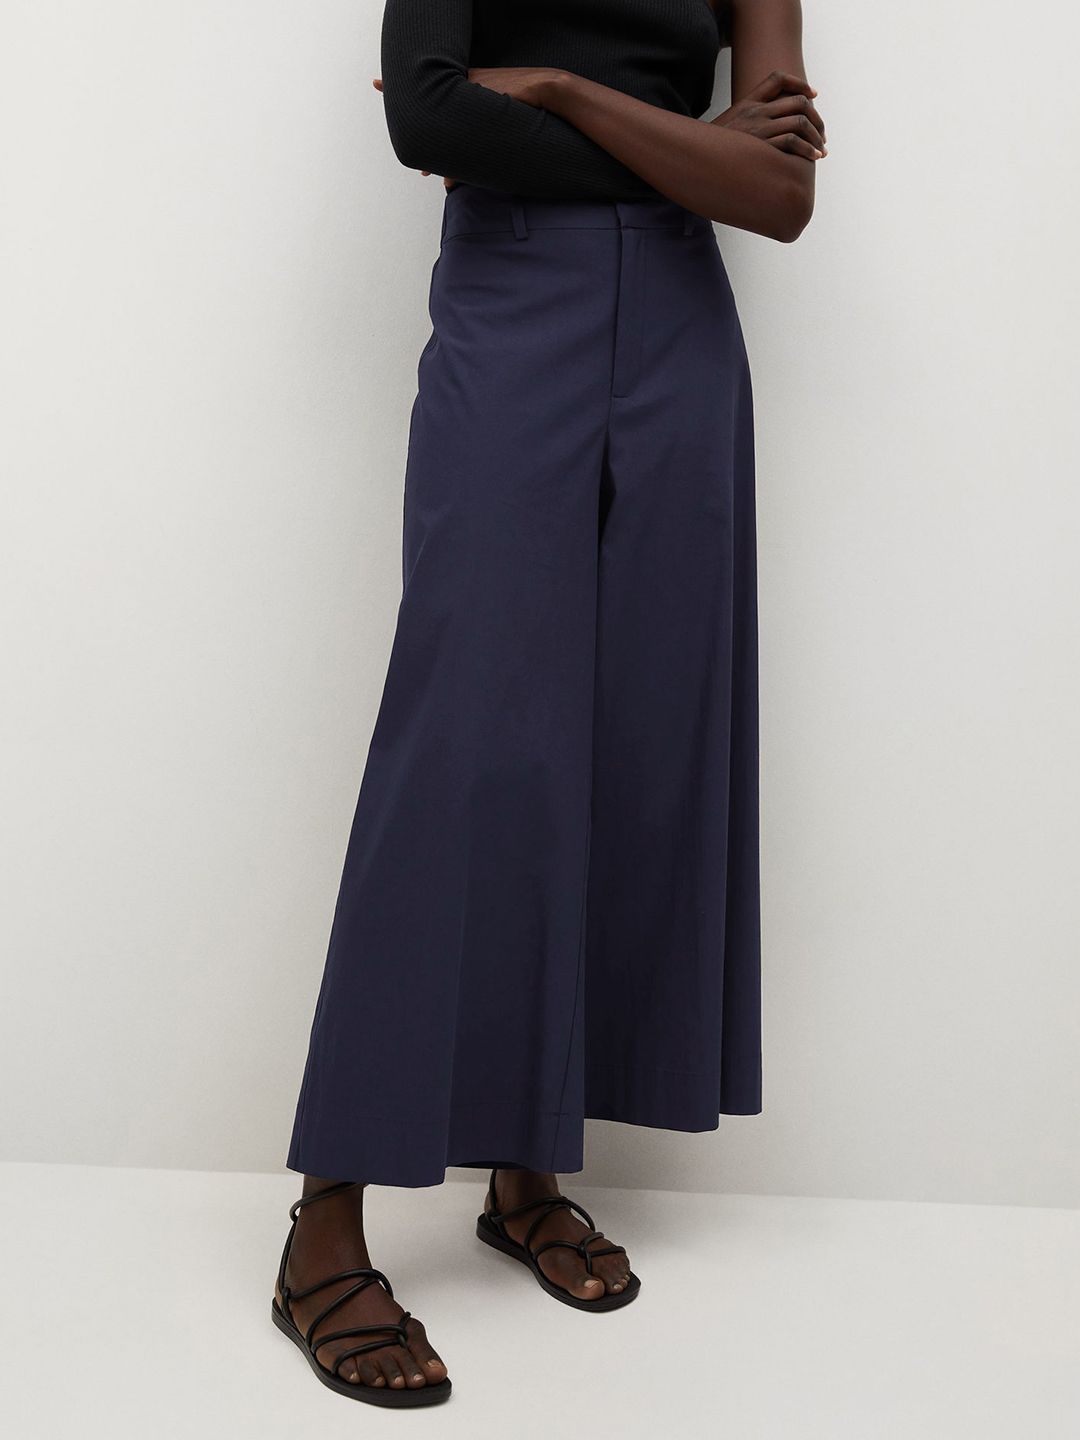 MANGO Women Navy Blue Solid Culottes Trousers Price in India